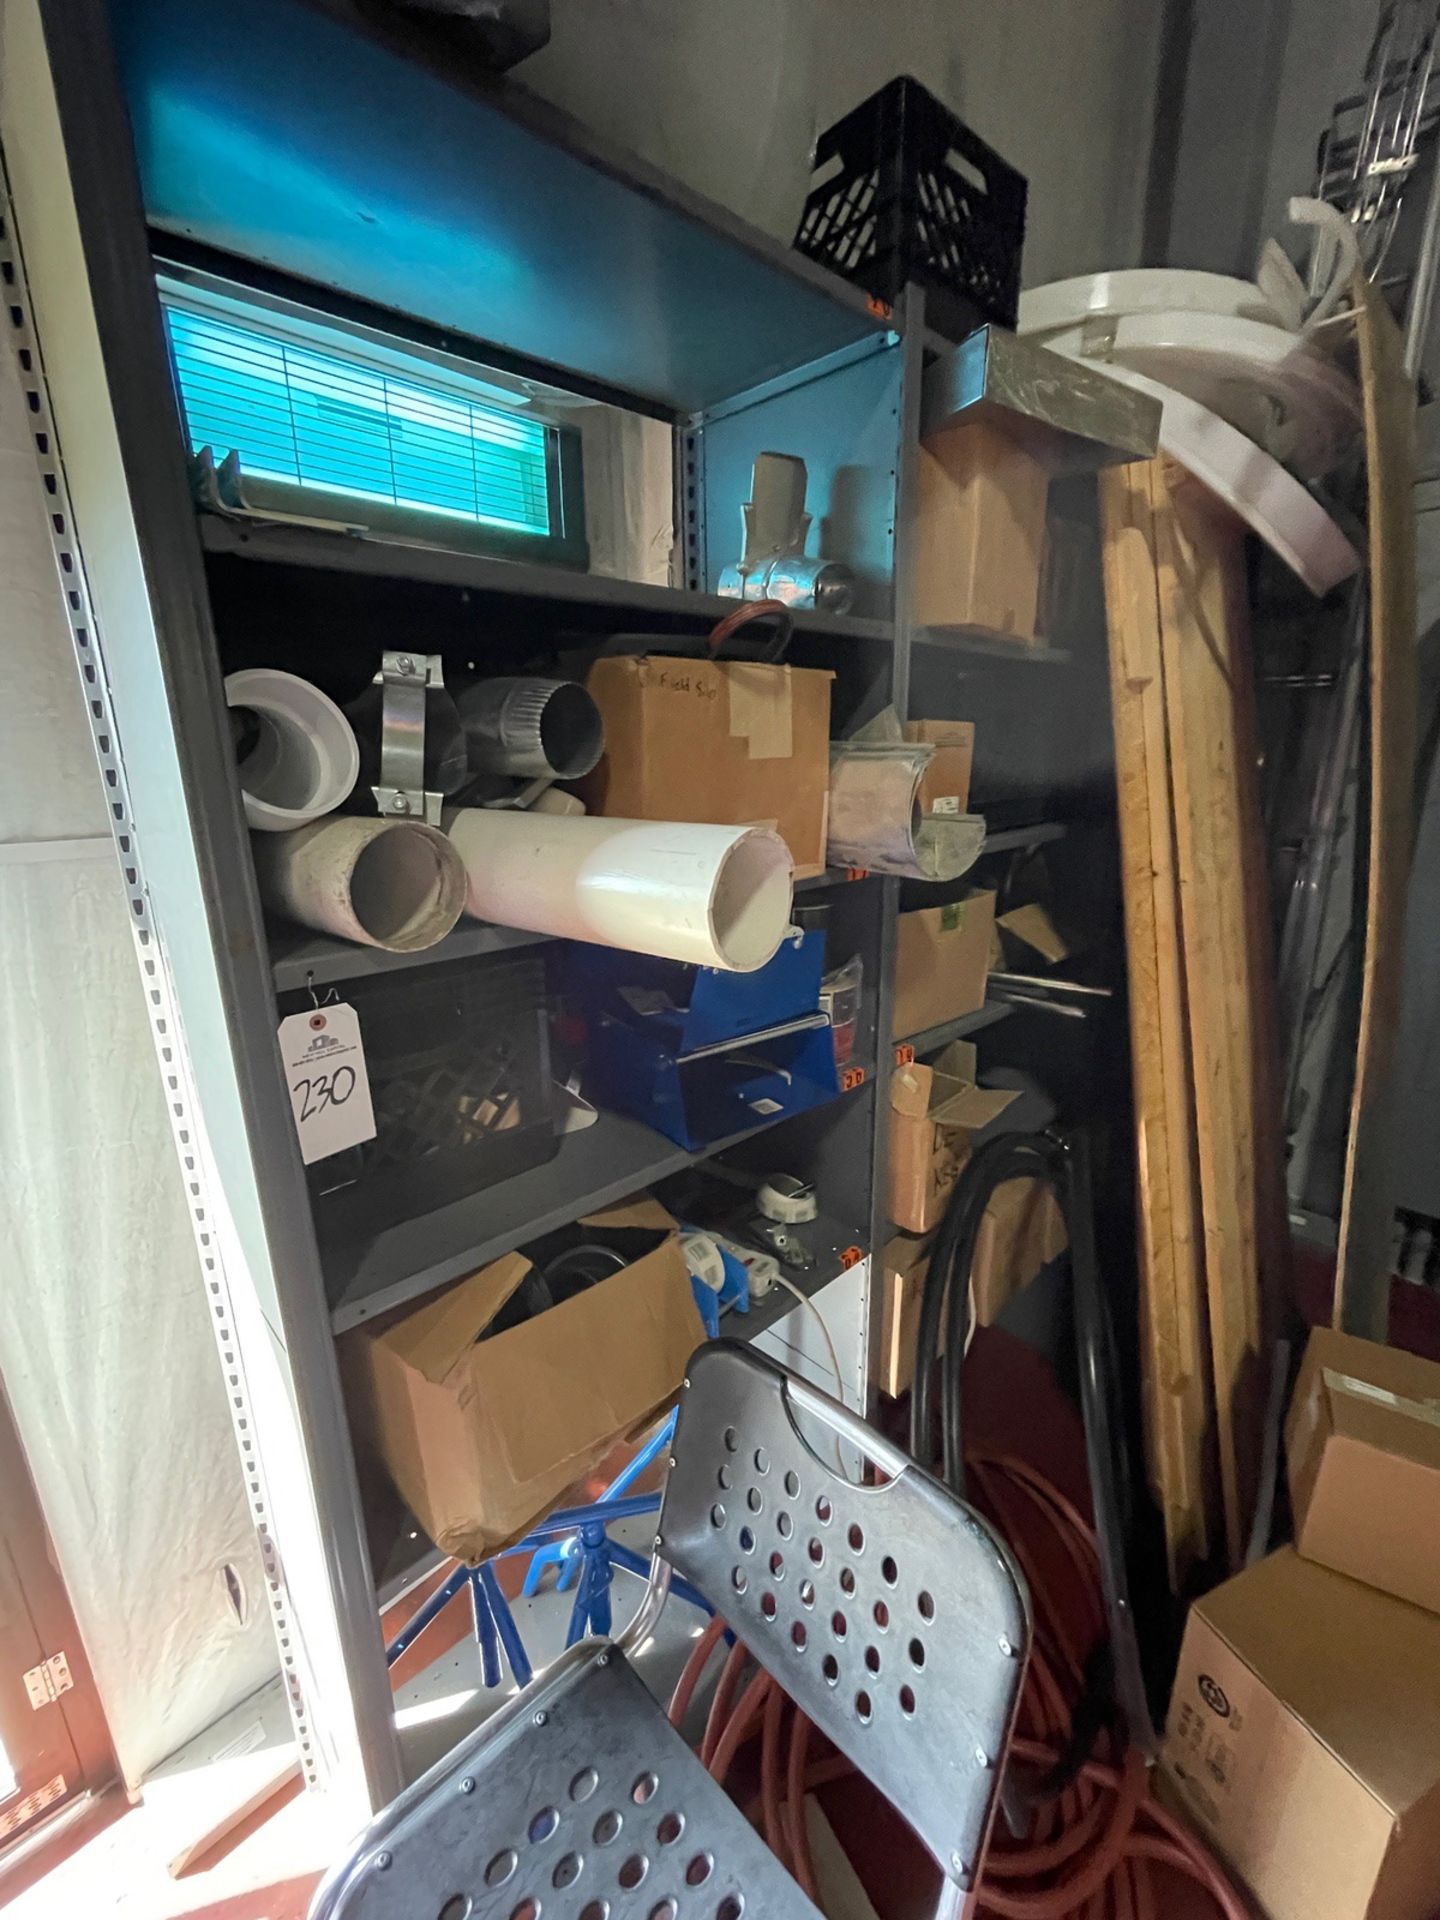 Section of Parts Shelves (includes items on shelf and shelving unit), - Subj to Bulk | Rig Fee $400